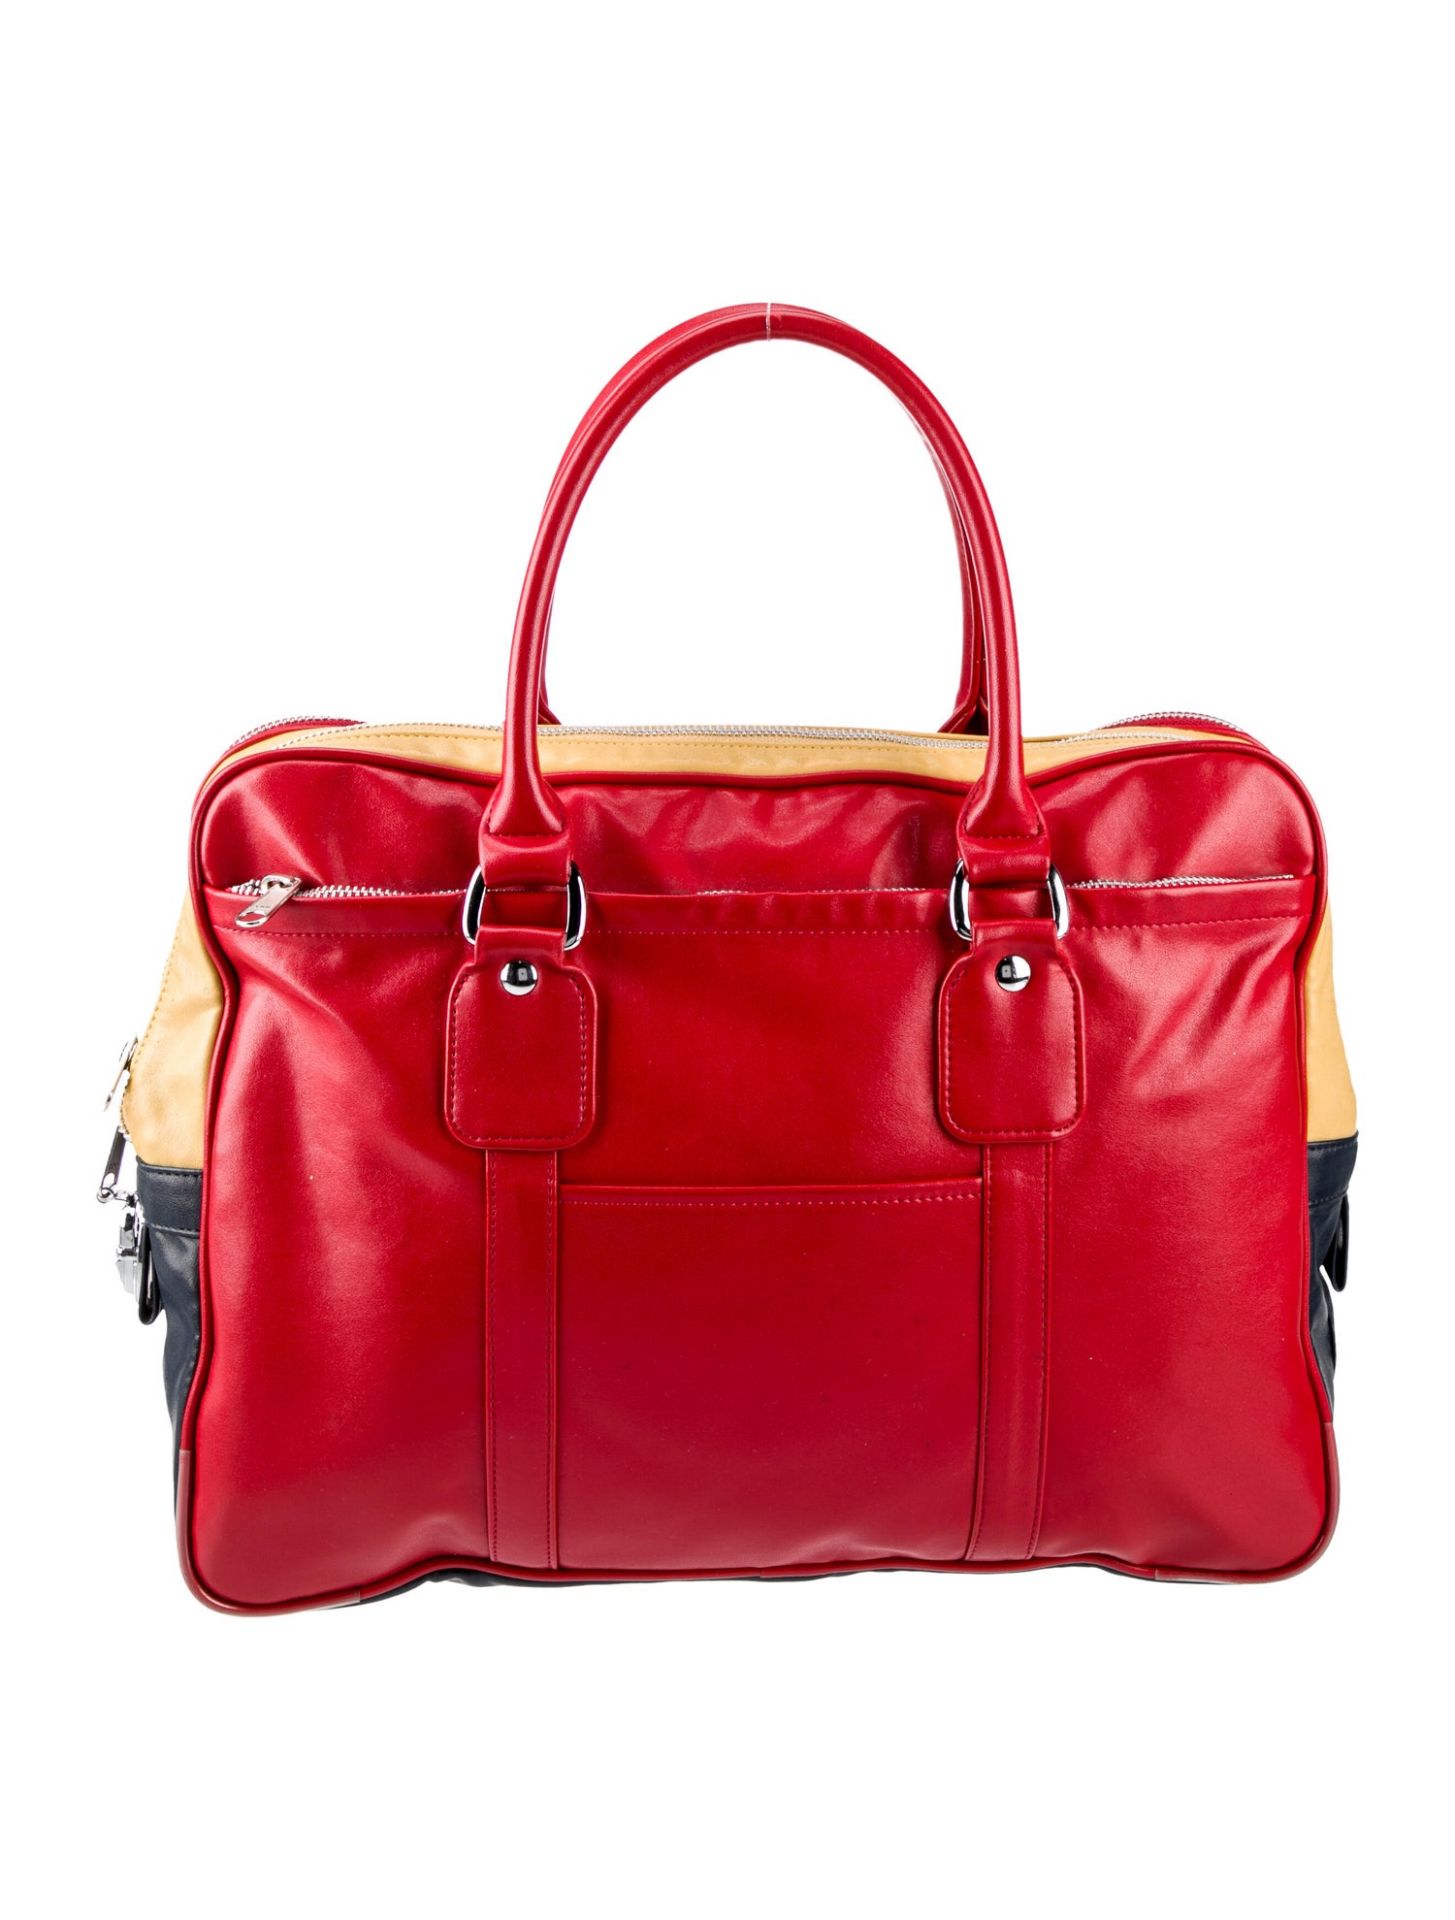 Comme Des GarÃ§ons Briefcase in Red Artificial Leather â€“ NEW â€“ RRP Â£175 ! - Image 5 of 9